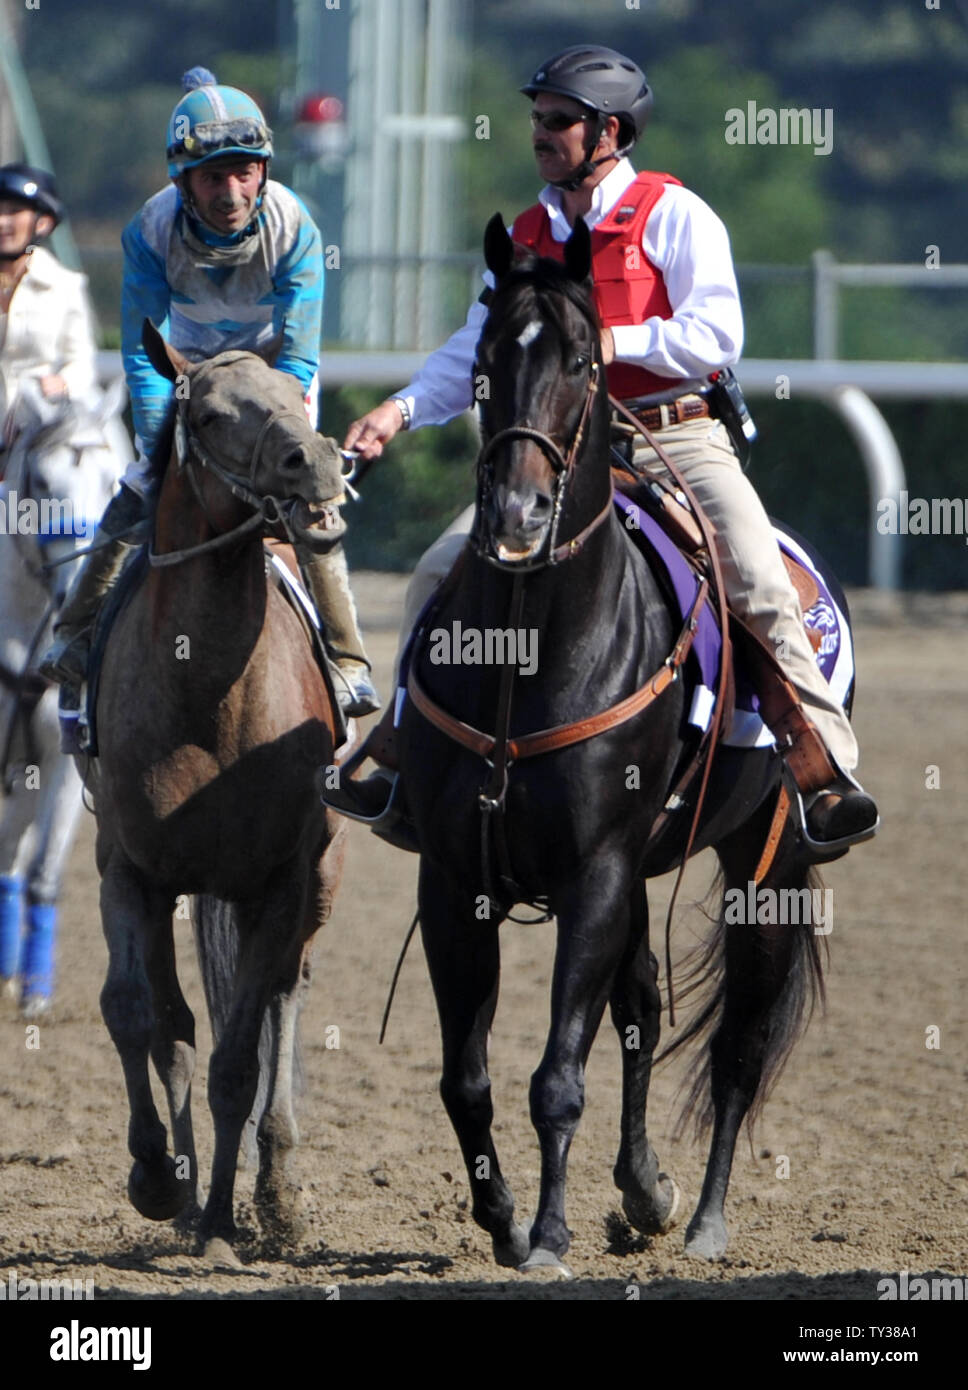 Aaron Gryder aboard Calidoscopio (L) heads to the winners circle after winning the Breeders Cup Marathon of the Breeders Cup World Championships at Santa Anita Park in Arcadia, CA November 2, 2012. UPI/Art Foxall Stock Photo